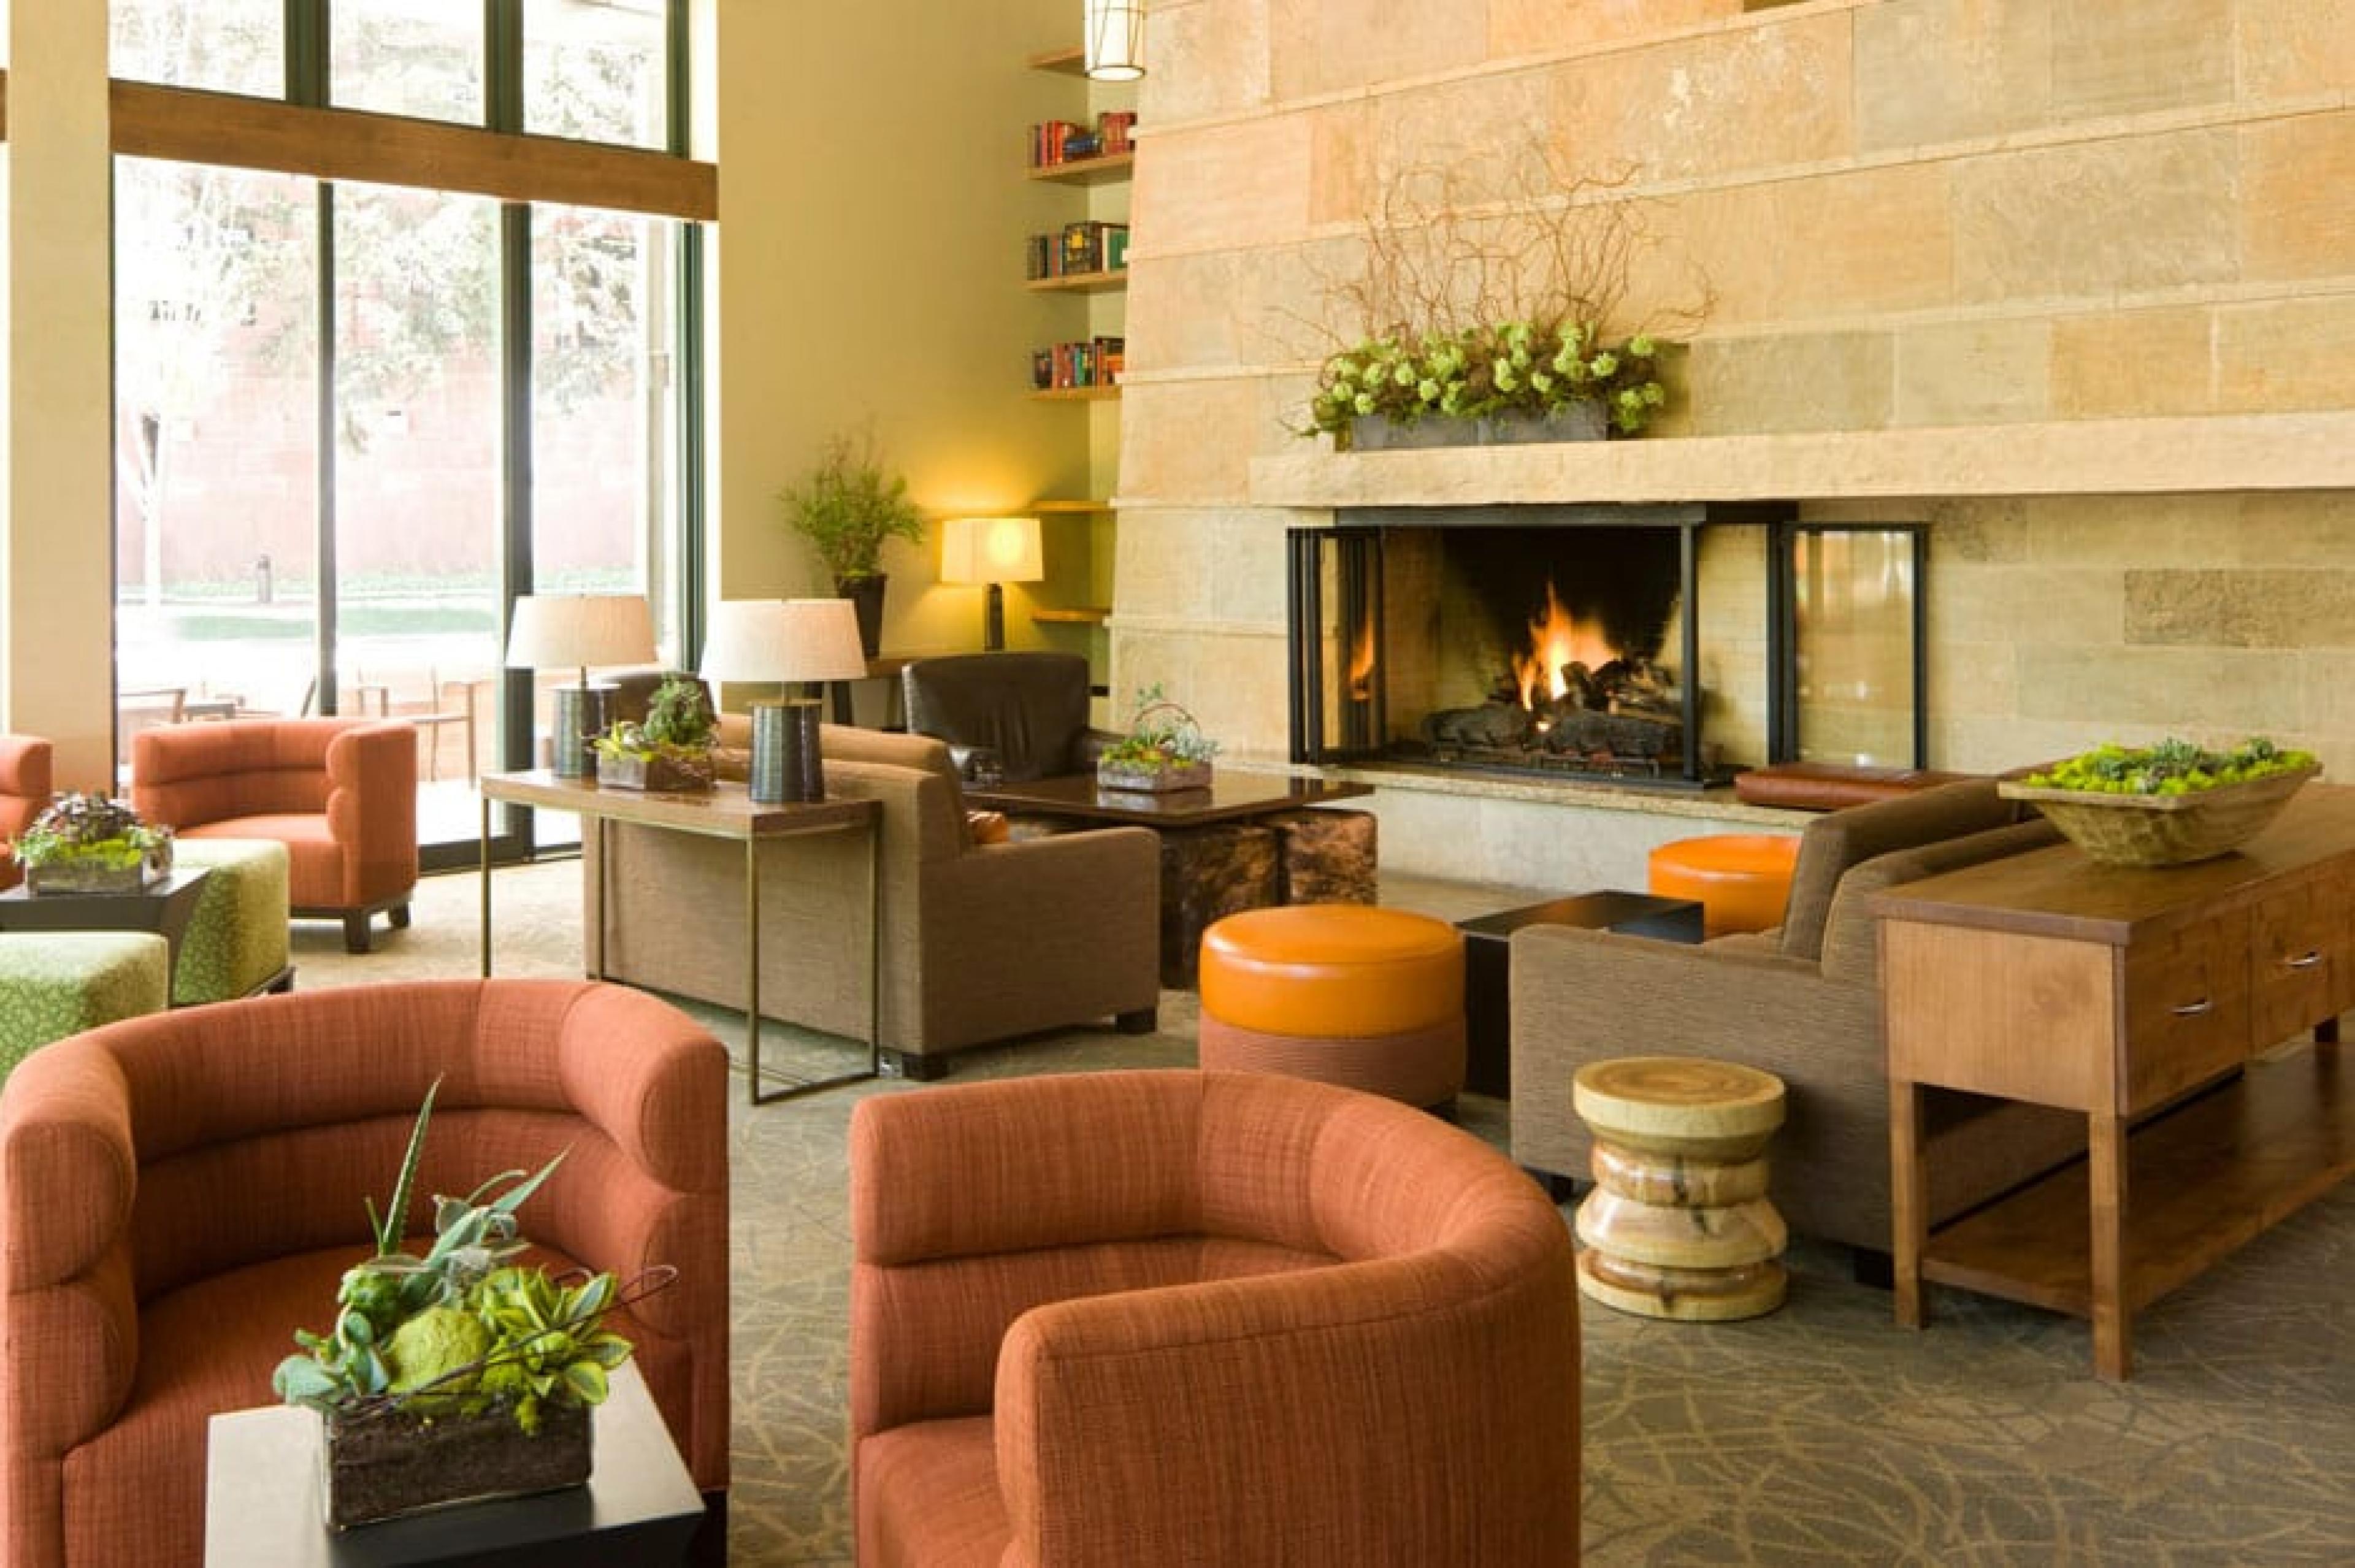 Lounge Lobby at Limelight Hotel, Aspen, American West